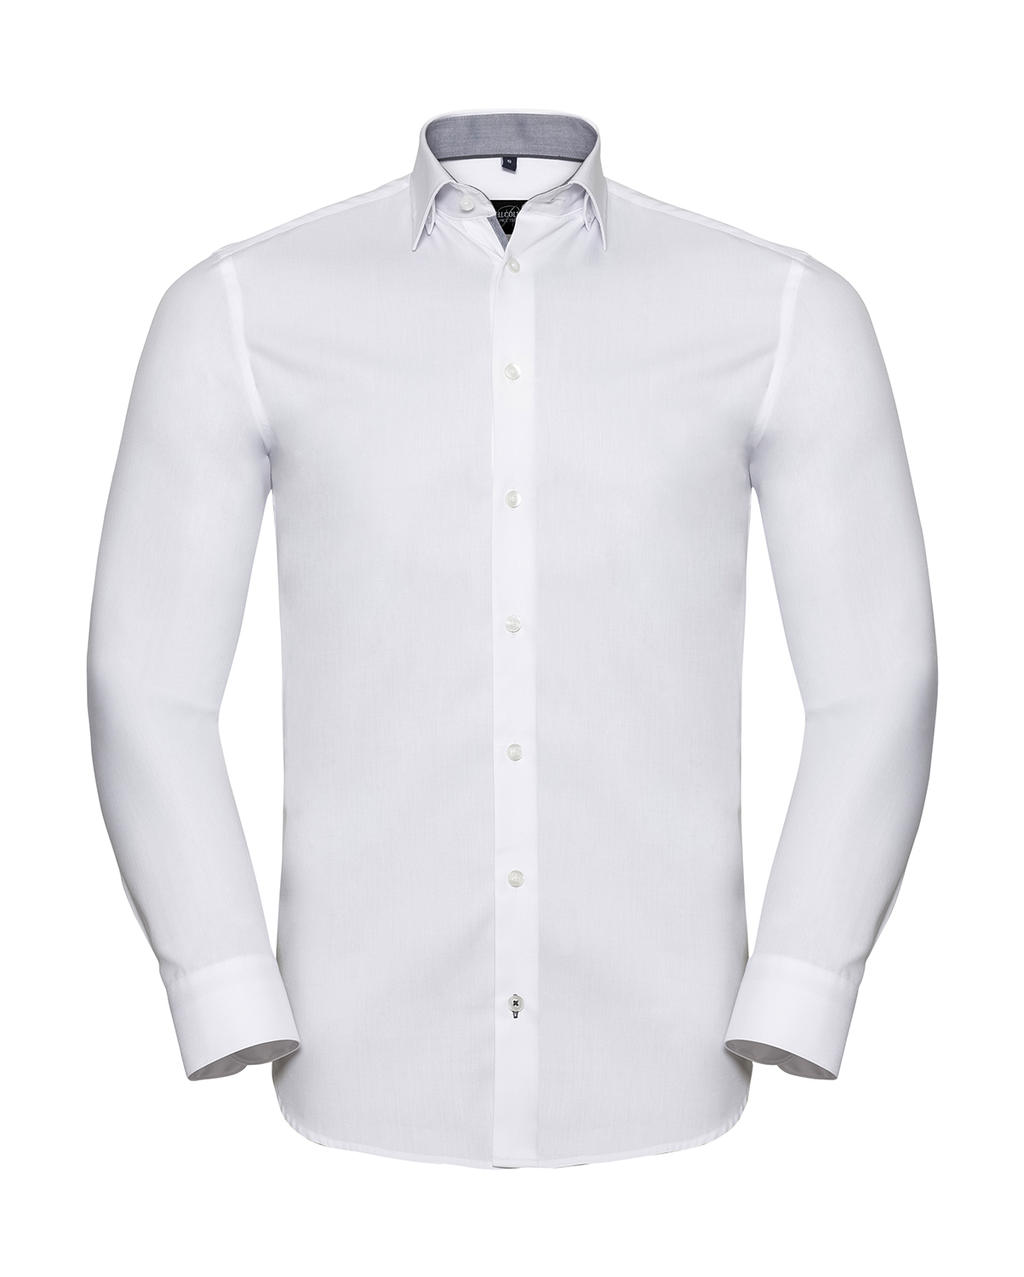  Tailored Contrast Herringbone Shirt LS in Farbe White/Silver/Convoy Grey